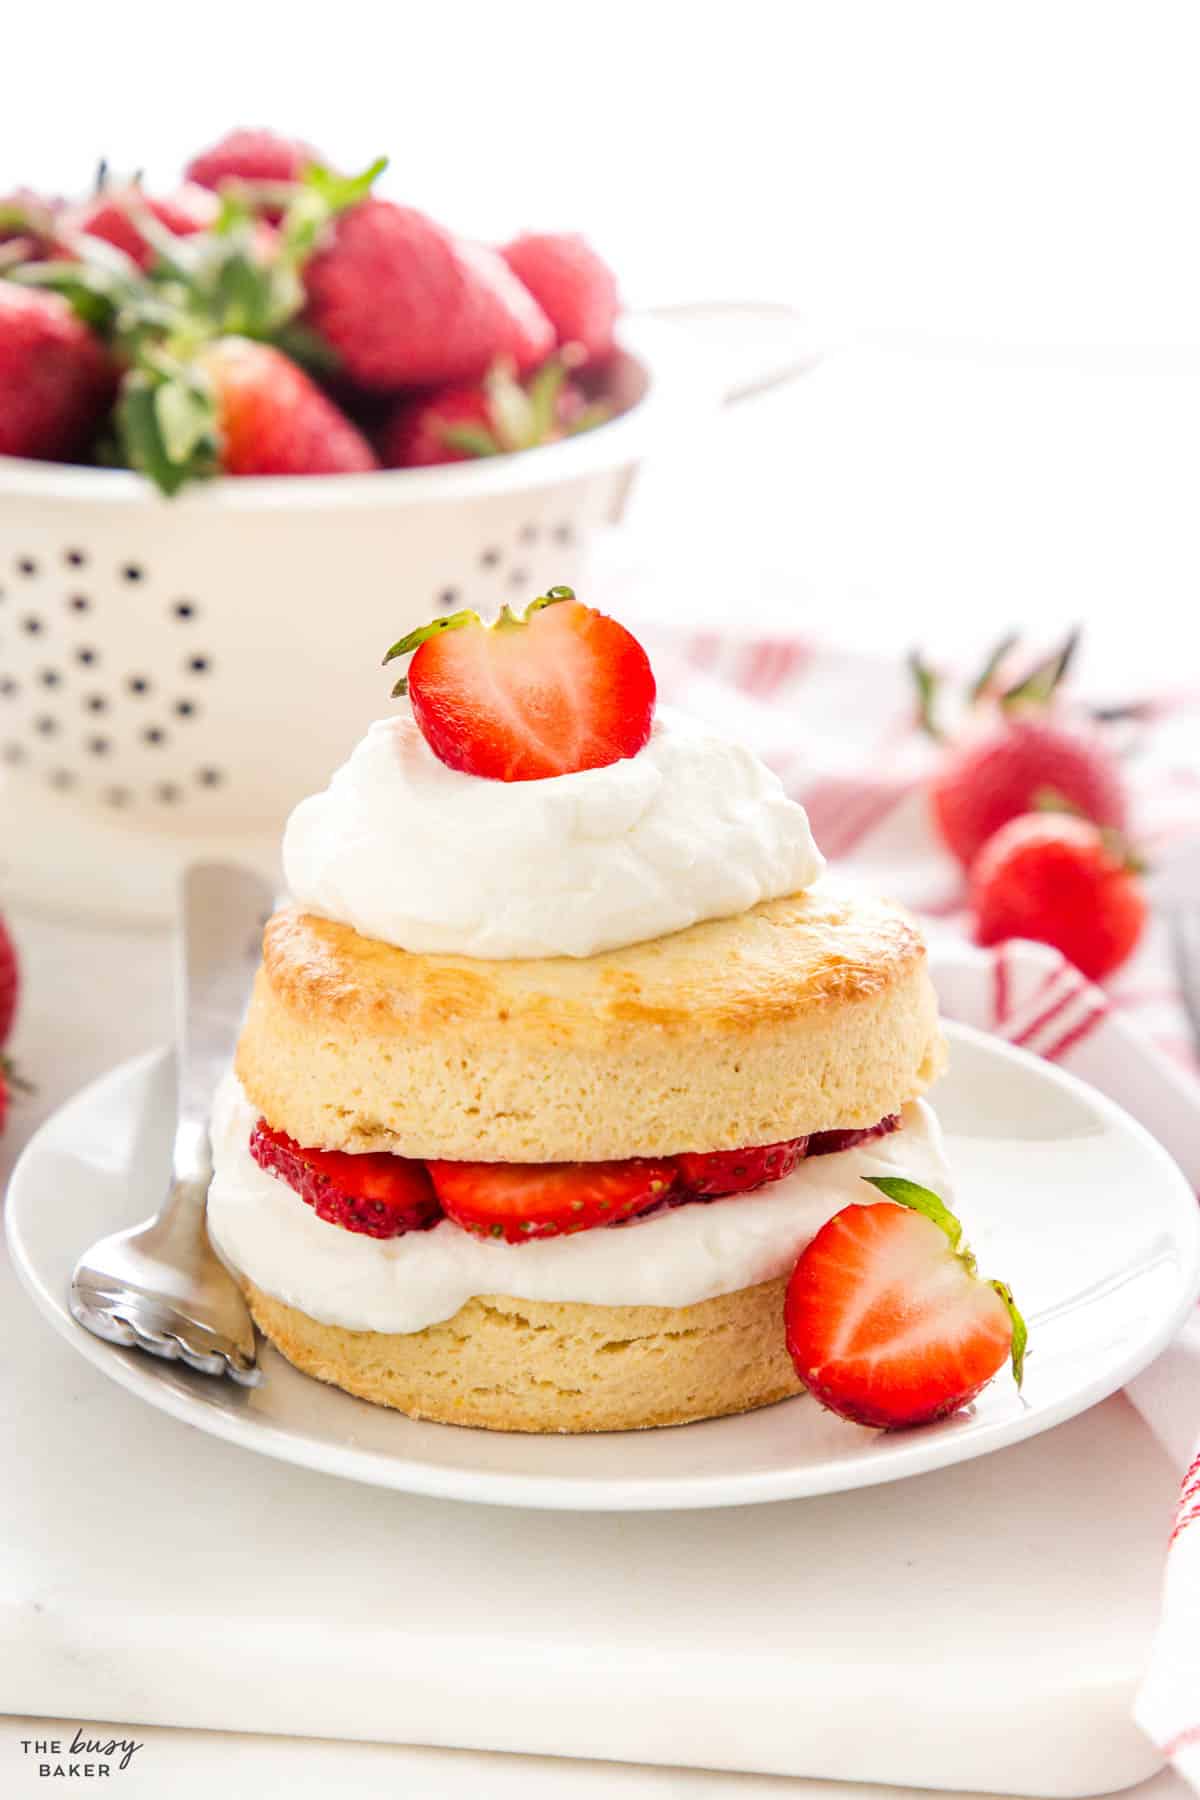 Soft flaky scone with berries and cream